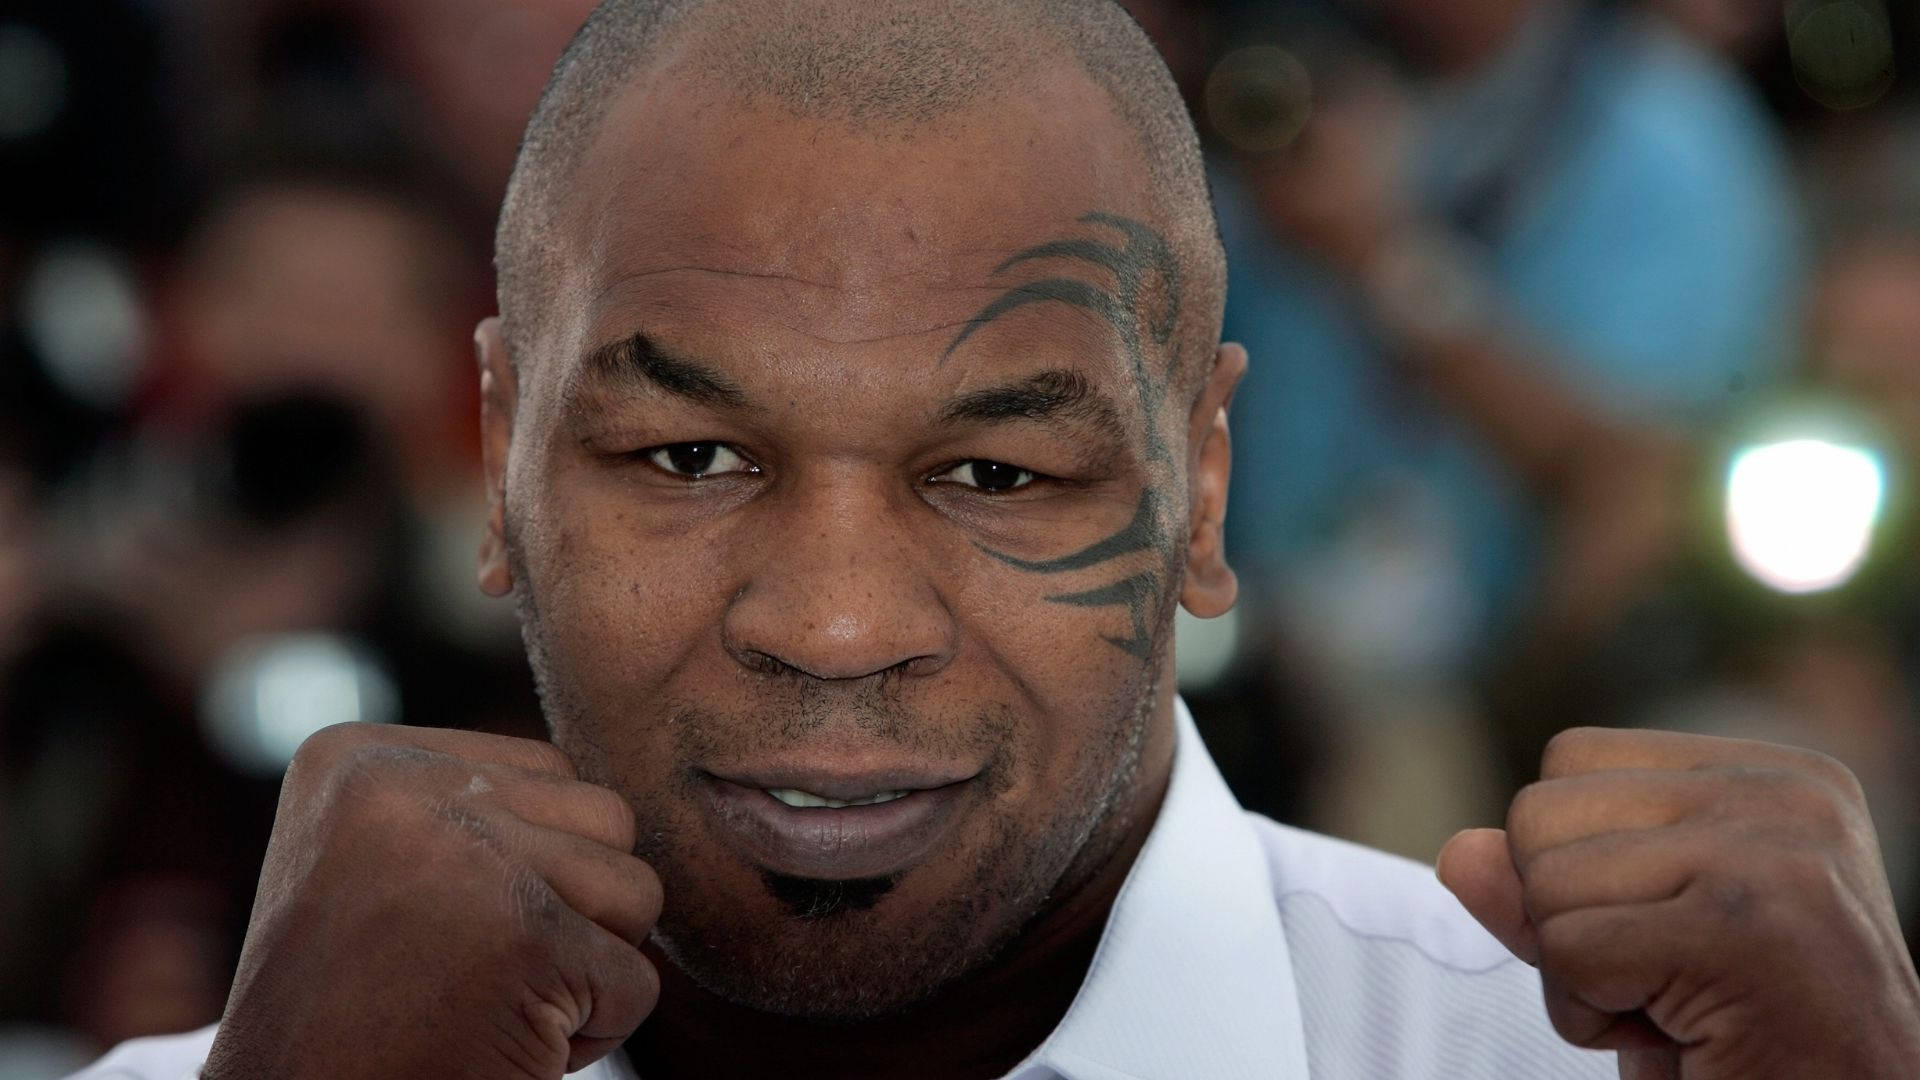 Mike Tyson Boxing Pose Background